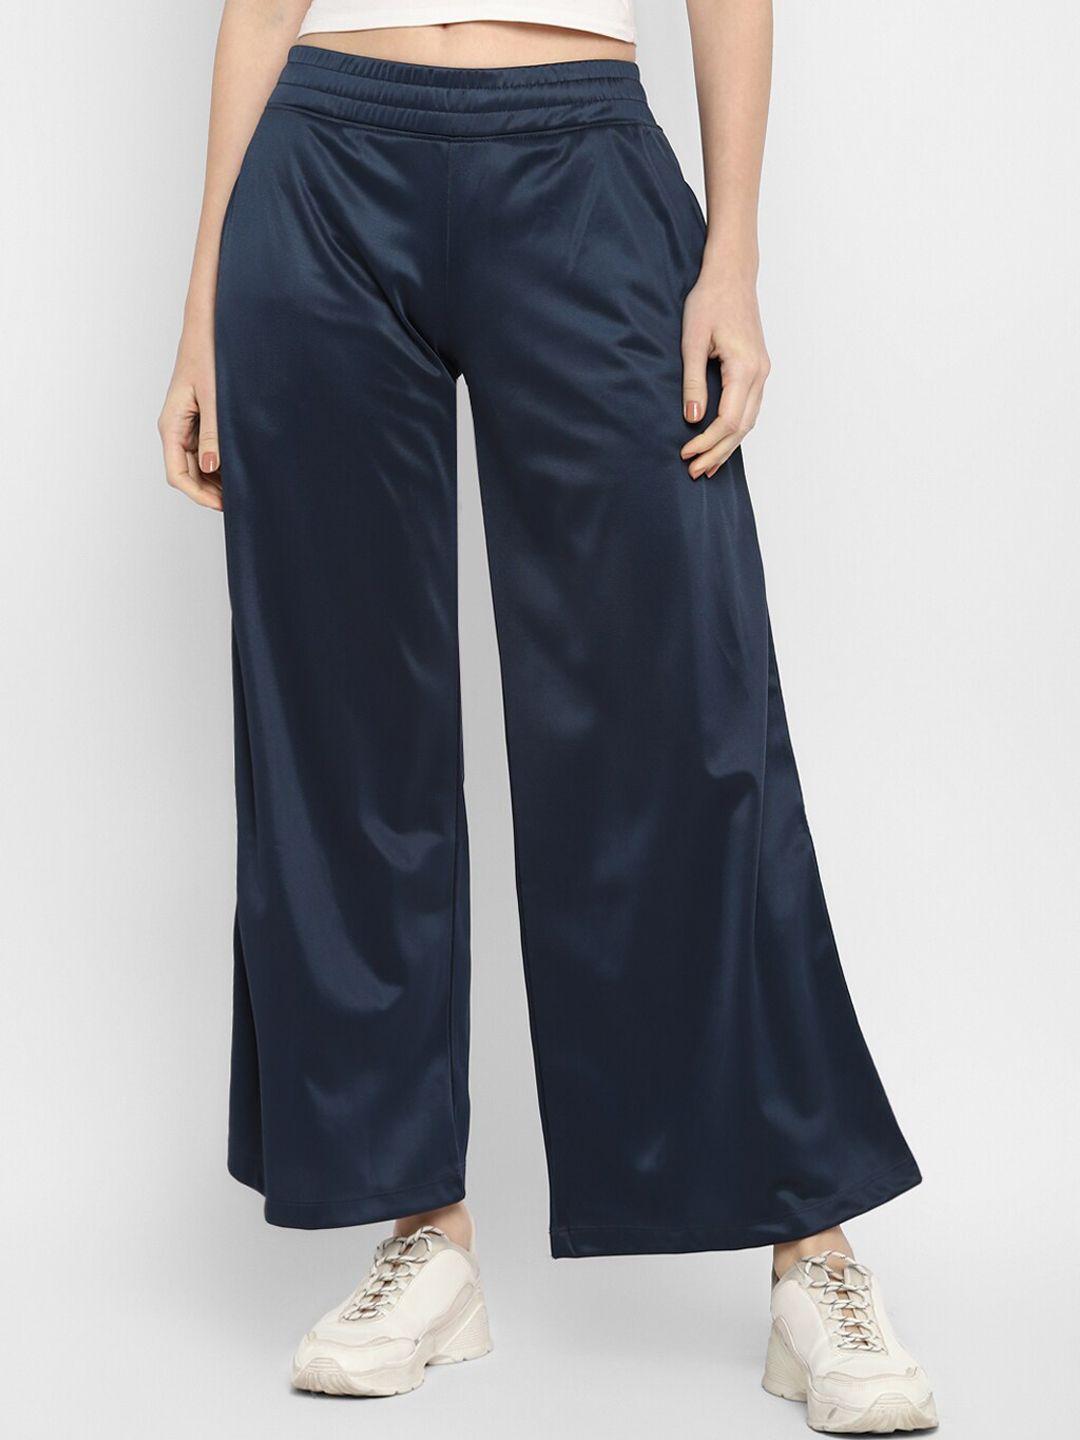 off limits women navy blue track pant